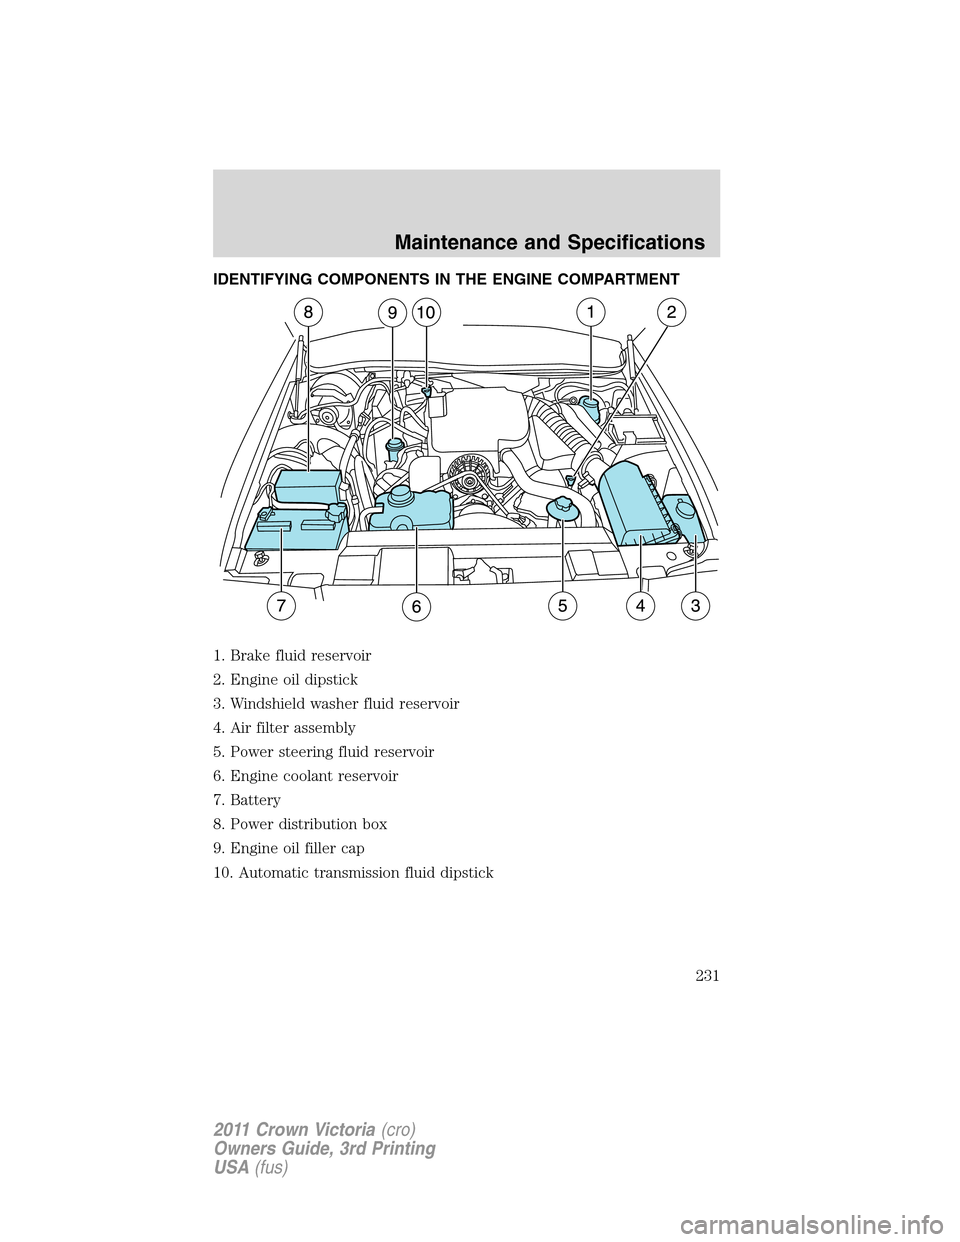 Mercury Grand Marquis 1011  s Service Manual IDENTIFYING COMPONENTS IN THE ENGINE COMPARTMENT
1. Brake fluid reservoir
2. Engine oil dipstick
3. Windshield washer fluid reservoir
4. Air filter assembly
5. Power steering fluid reservoir
6. Engine